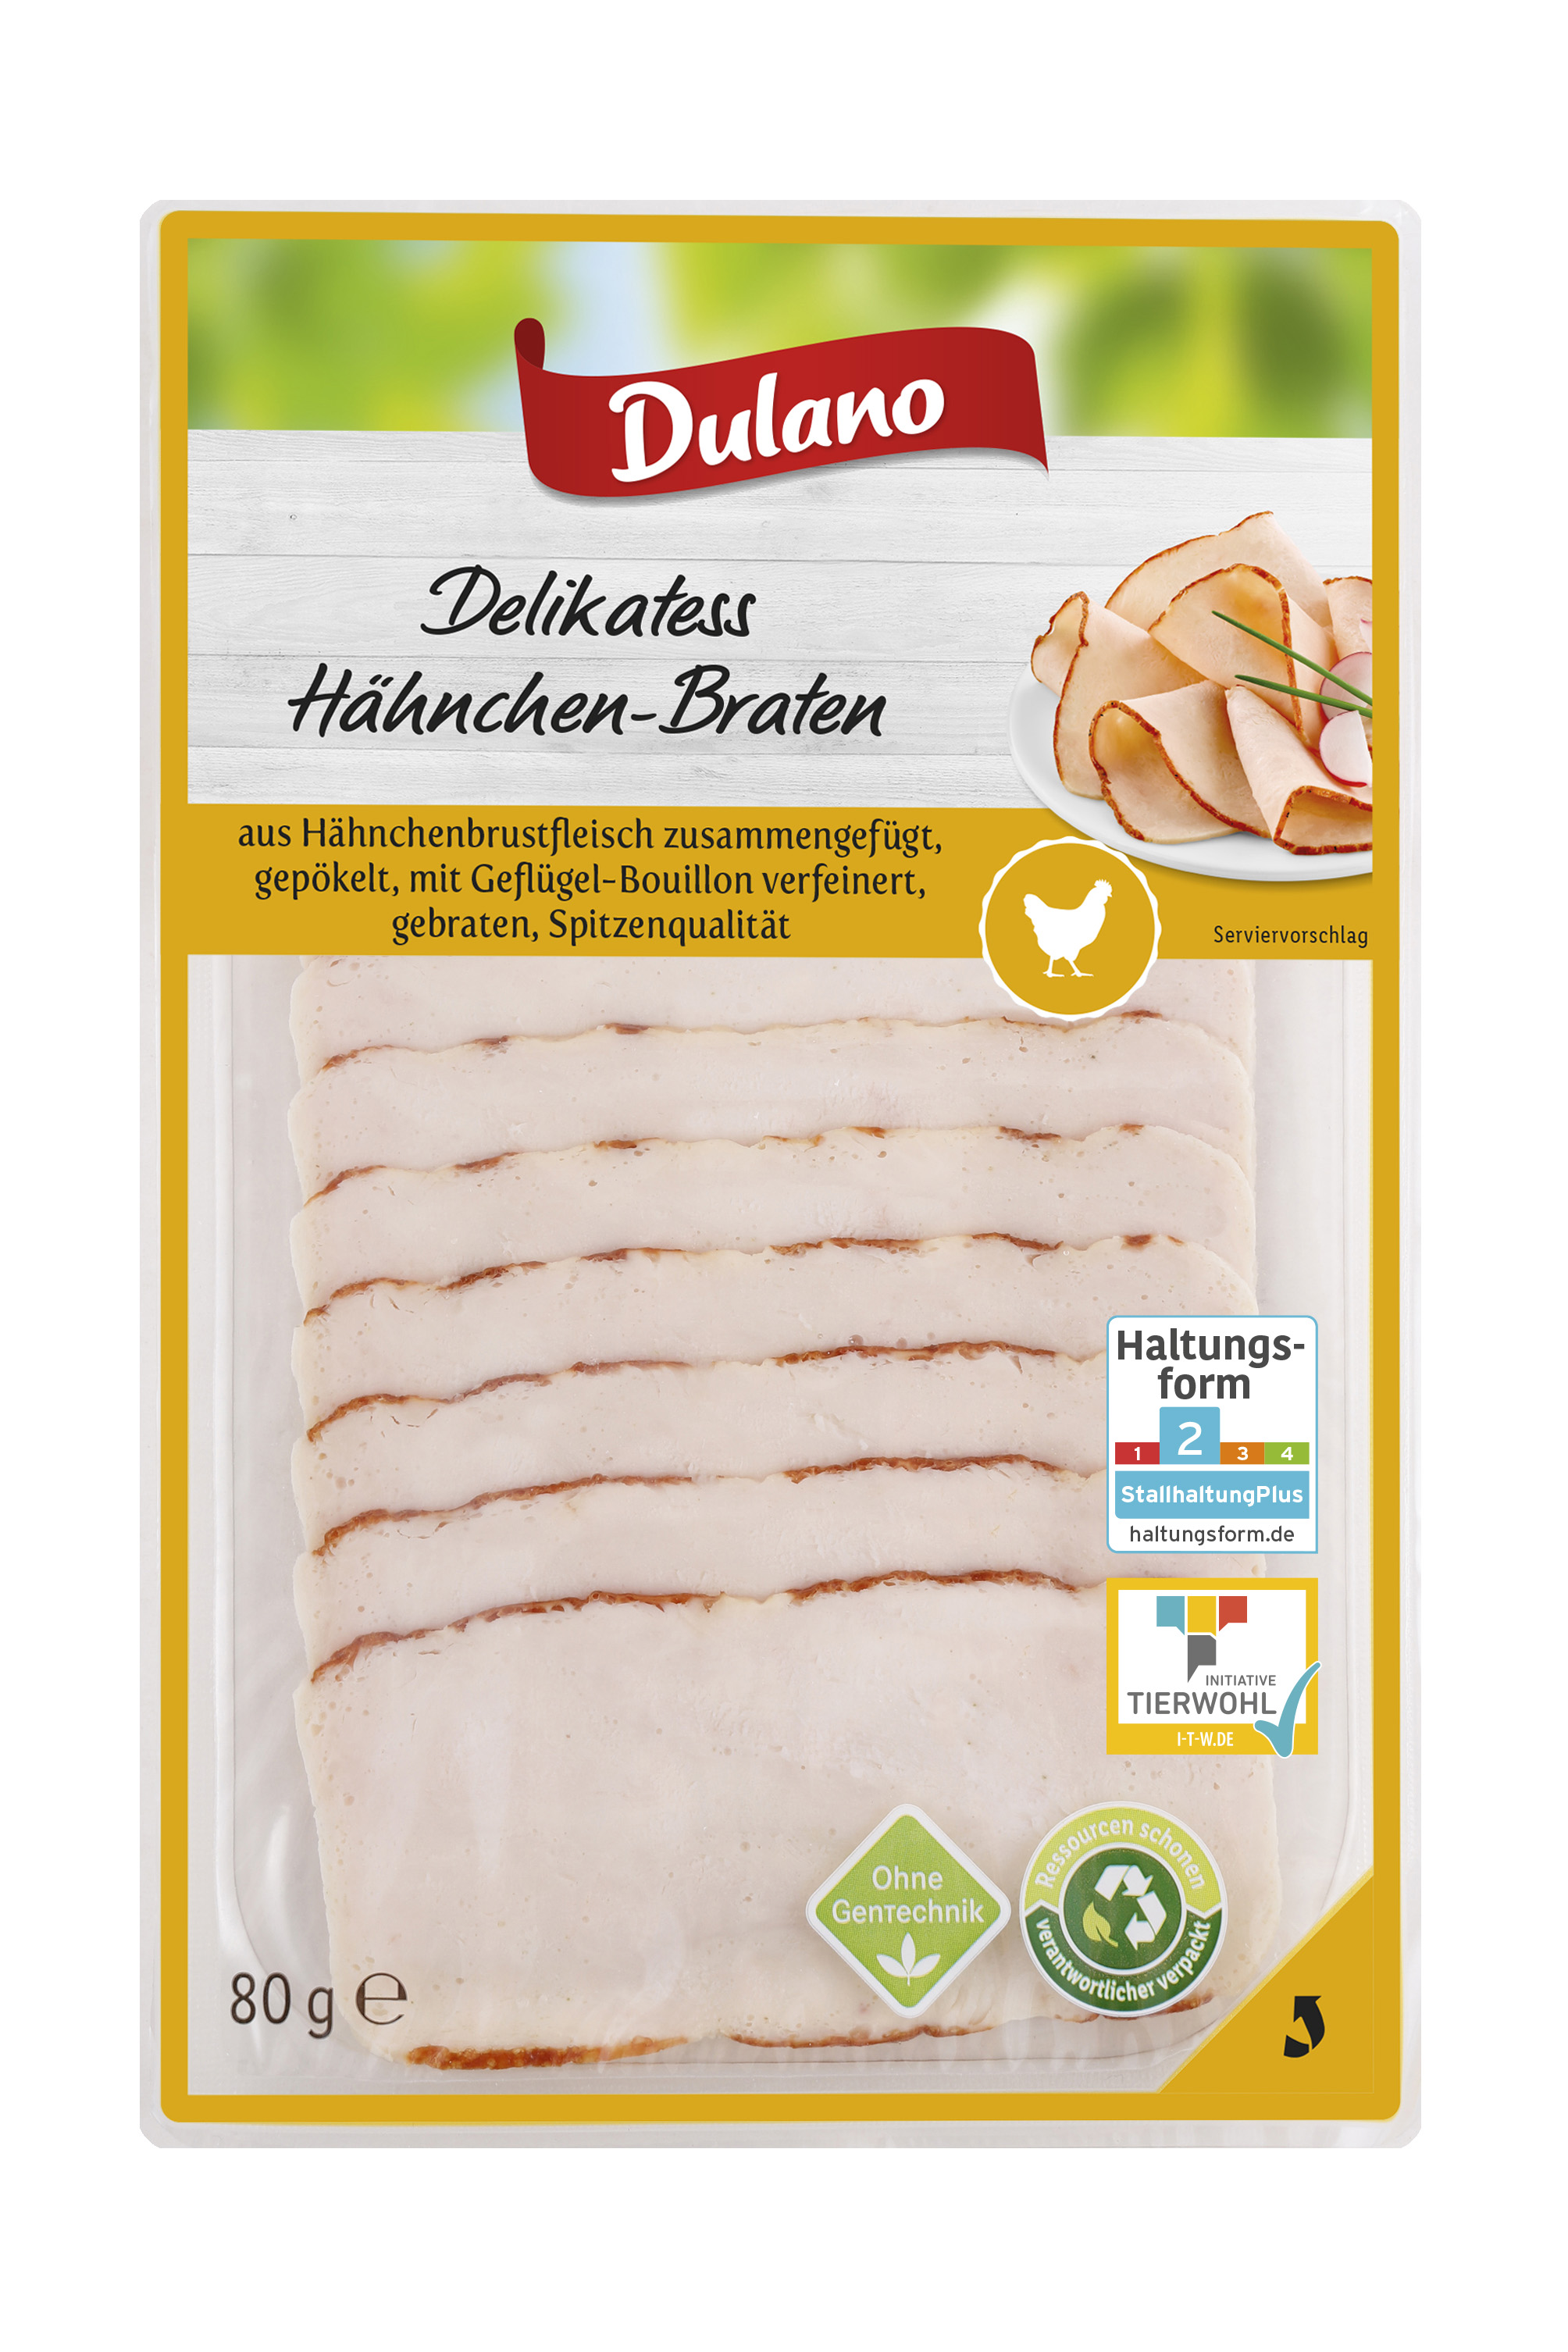 Dulano (Lidl) · Hähnchenbraten Mühlen · zur Food Prepared/Processed / - (80 Gruppe Meat/Poultry/Sausages Markenvertriebs Meat/Poultry - Sausages GmbH / grams) Chicken Sausages Beverage Prepared/Processed mynetfair Tobacco